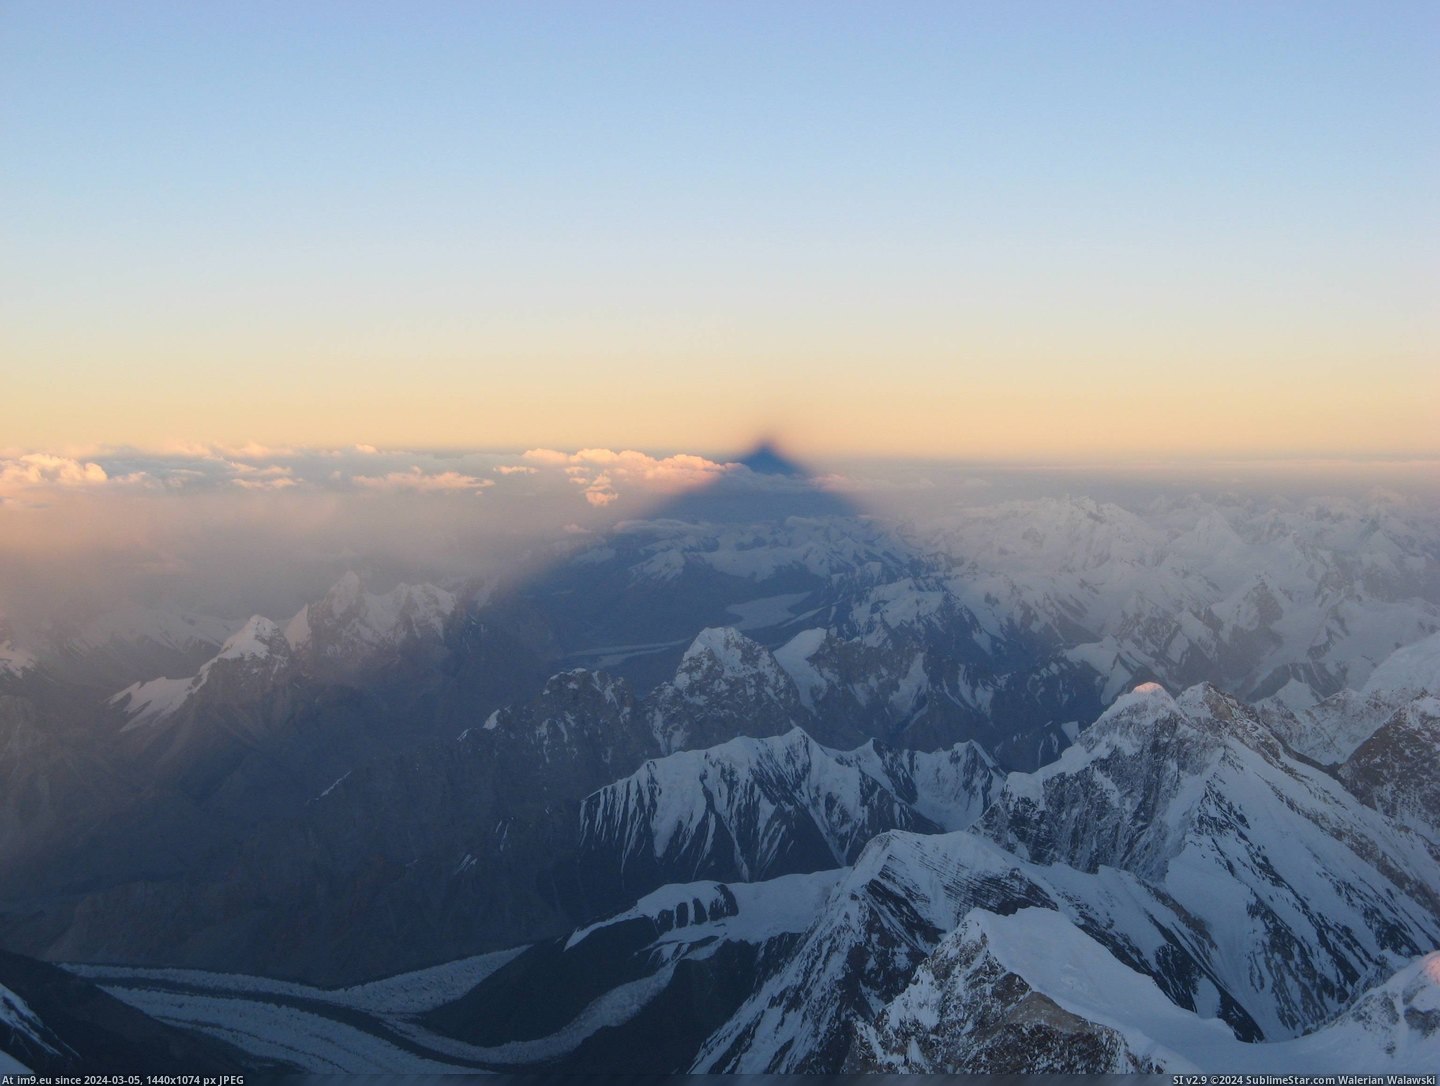 #China #Shadow #Miles #Projected #Warner #Chris #3072x2304 #Hundreds [Earthporn] The Shadow of K2, projected into China across hundreds of miles. (Chris B. Warner) [3072x2304] Pic. (Изображение из альбом My r/EARTHPORN favs))